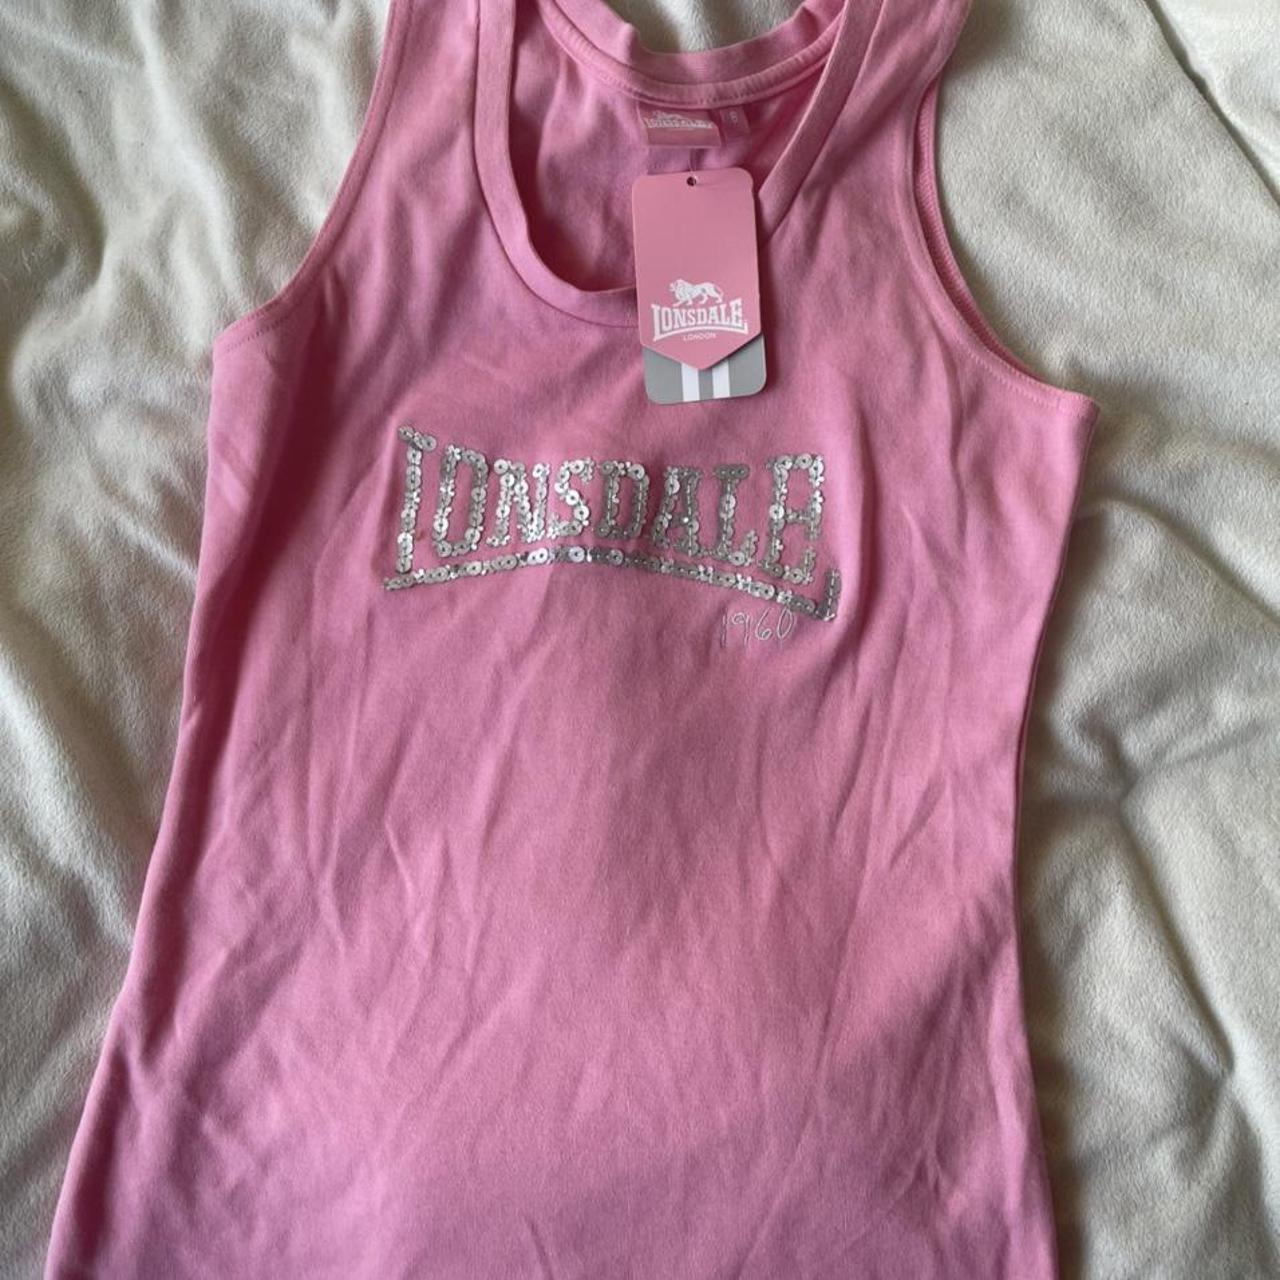 Product Image 1 - Pink tank top Lonsdale

Lonsdale brand